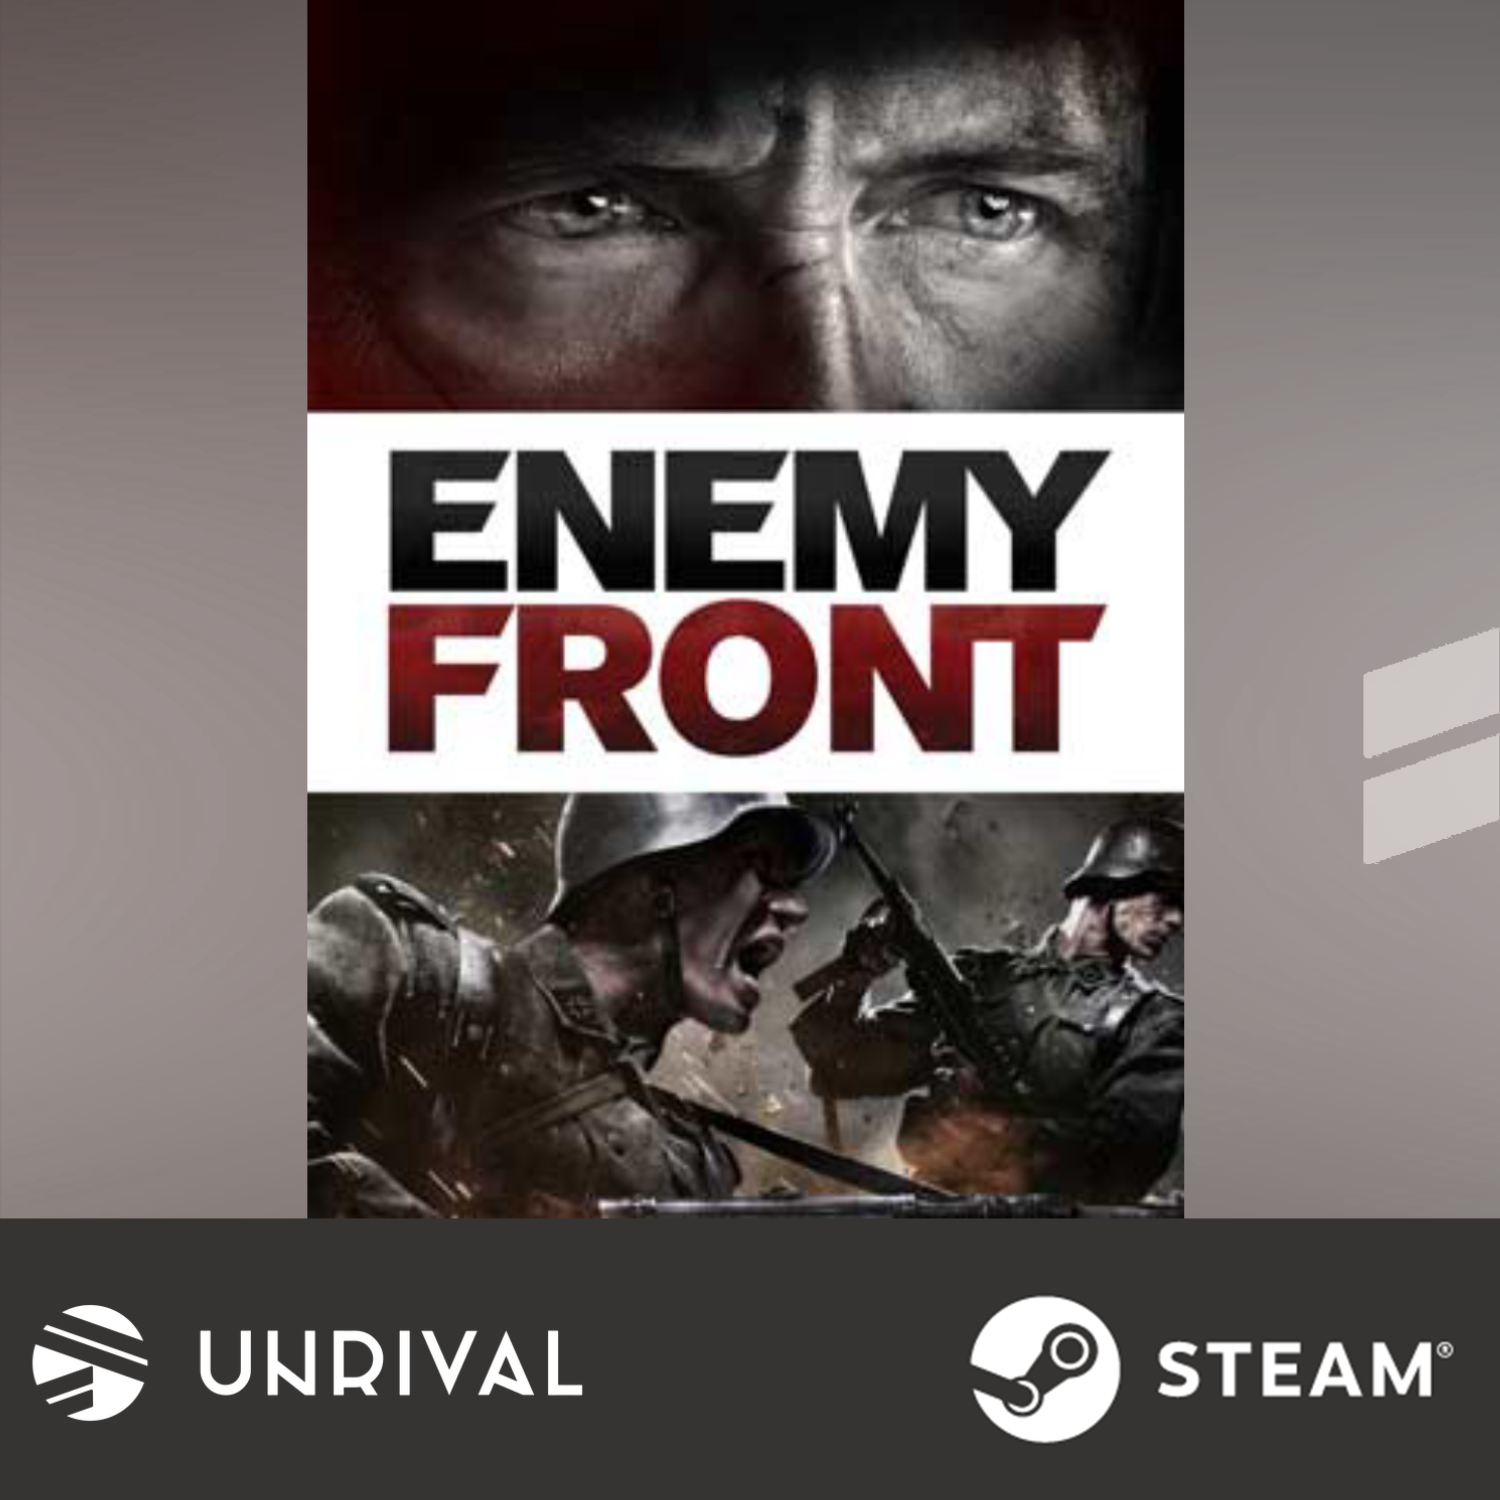 enemy front pc ame download